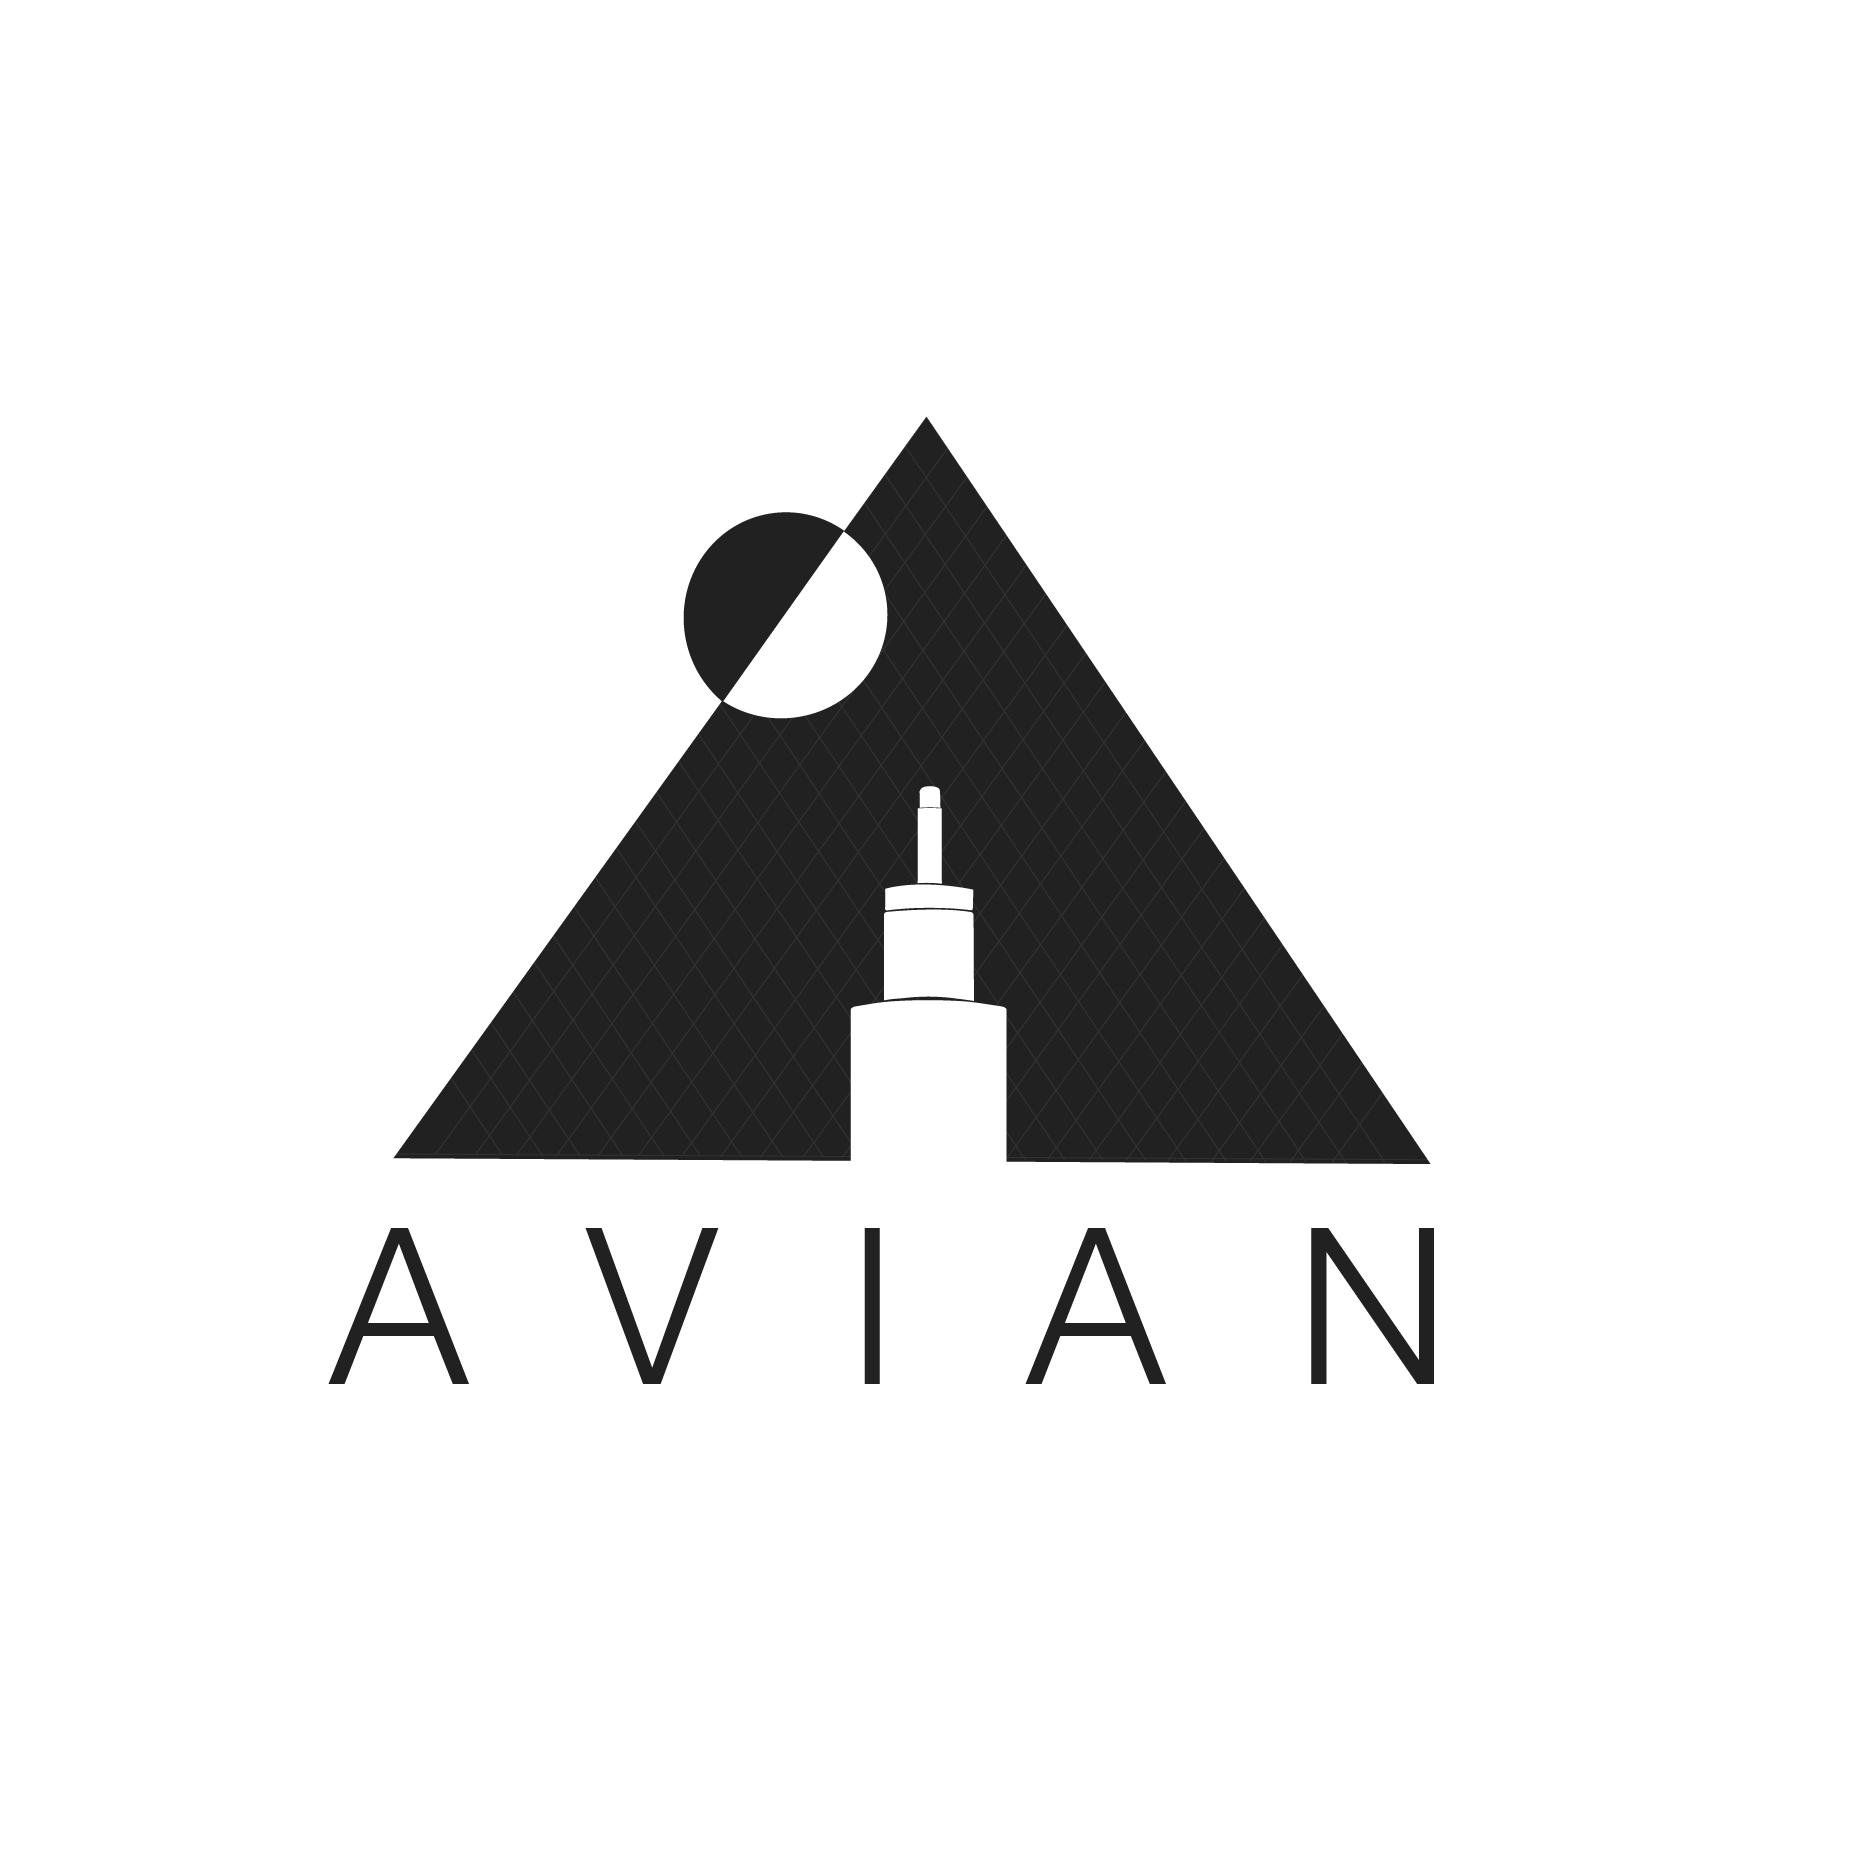 Avian is a team of multidisciplinary designers all coming together with a common vision of Innovation, Creativity and Change driven by design.